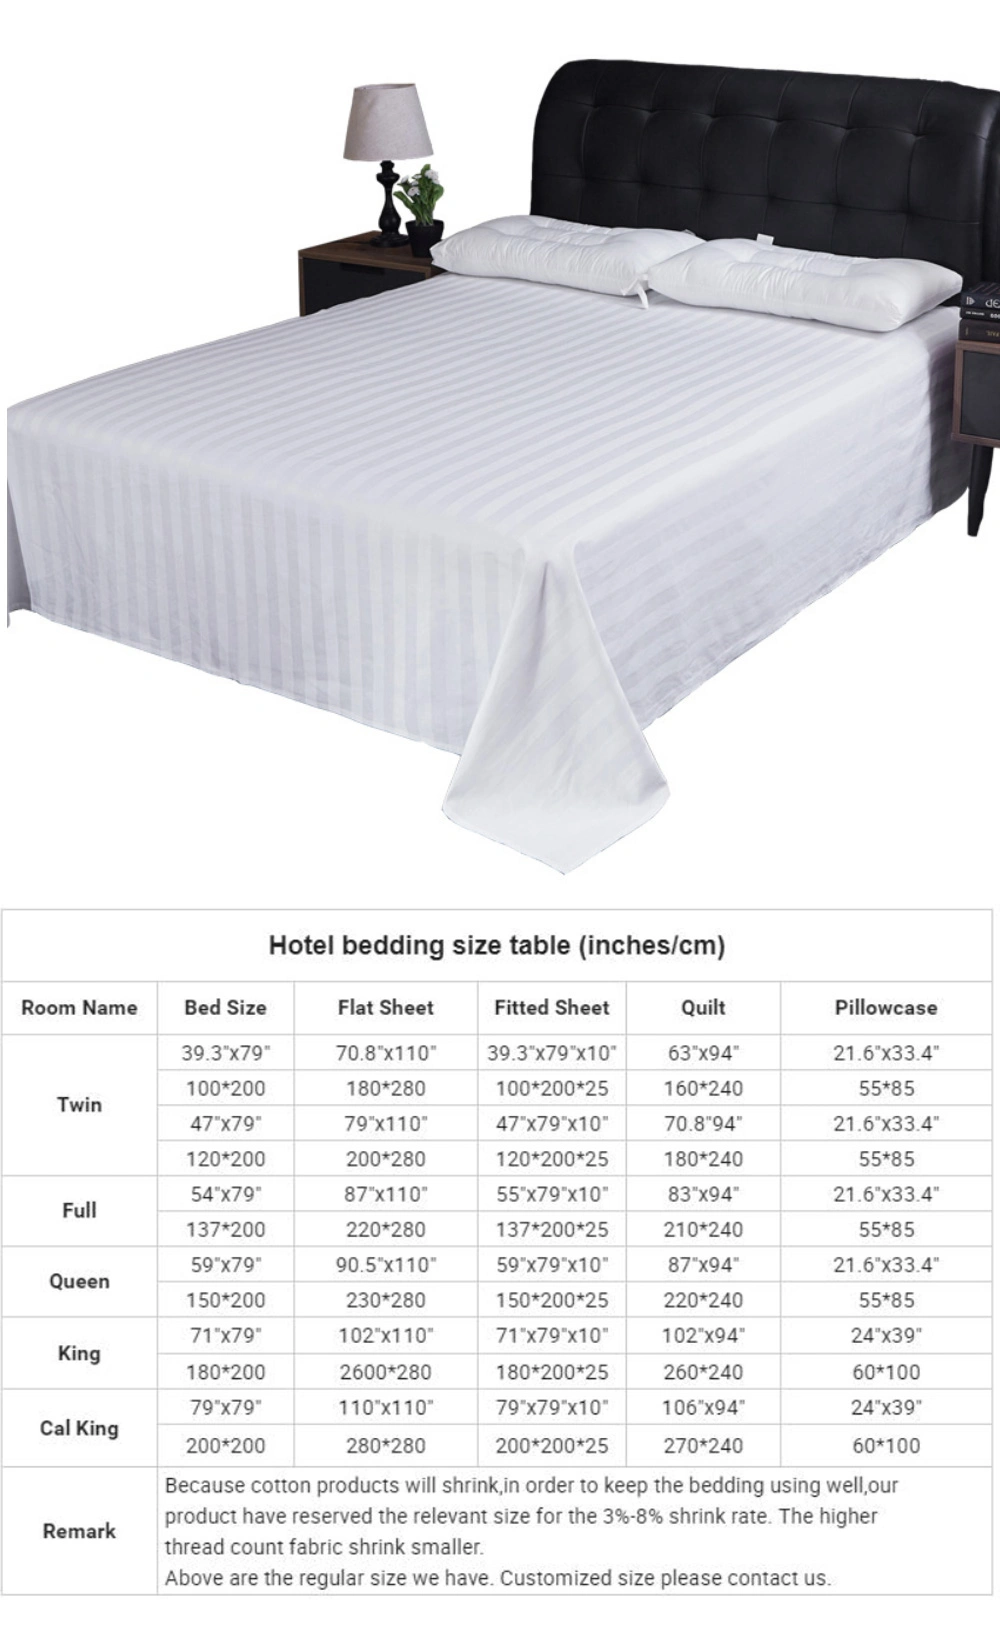 100% Cotton Fire-Resistant/ Anti-Flamming/ Fire Resistant Soft 5 Star Hotel Bedding Set